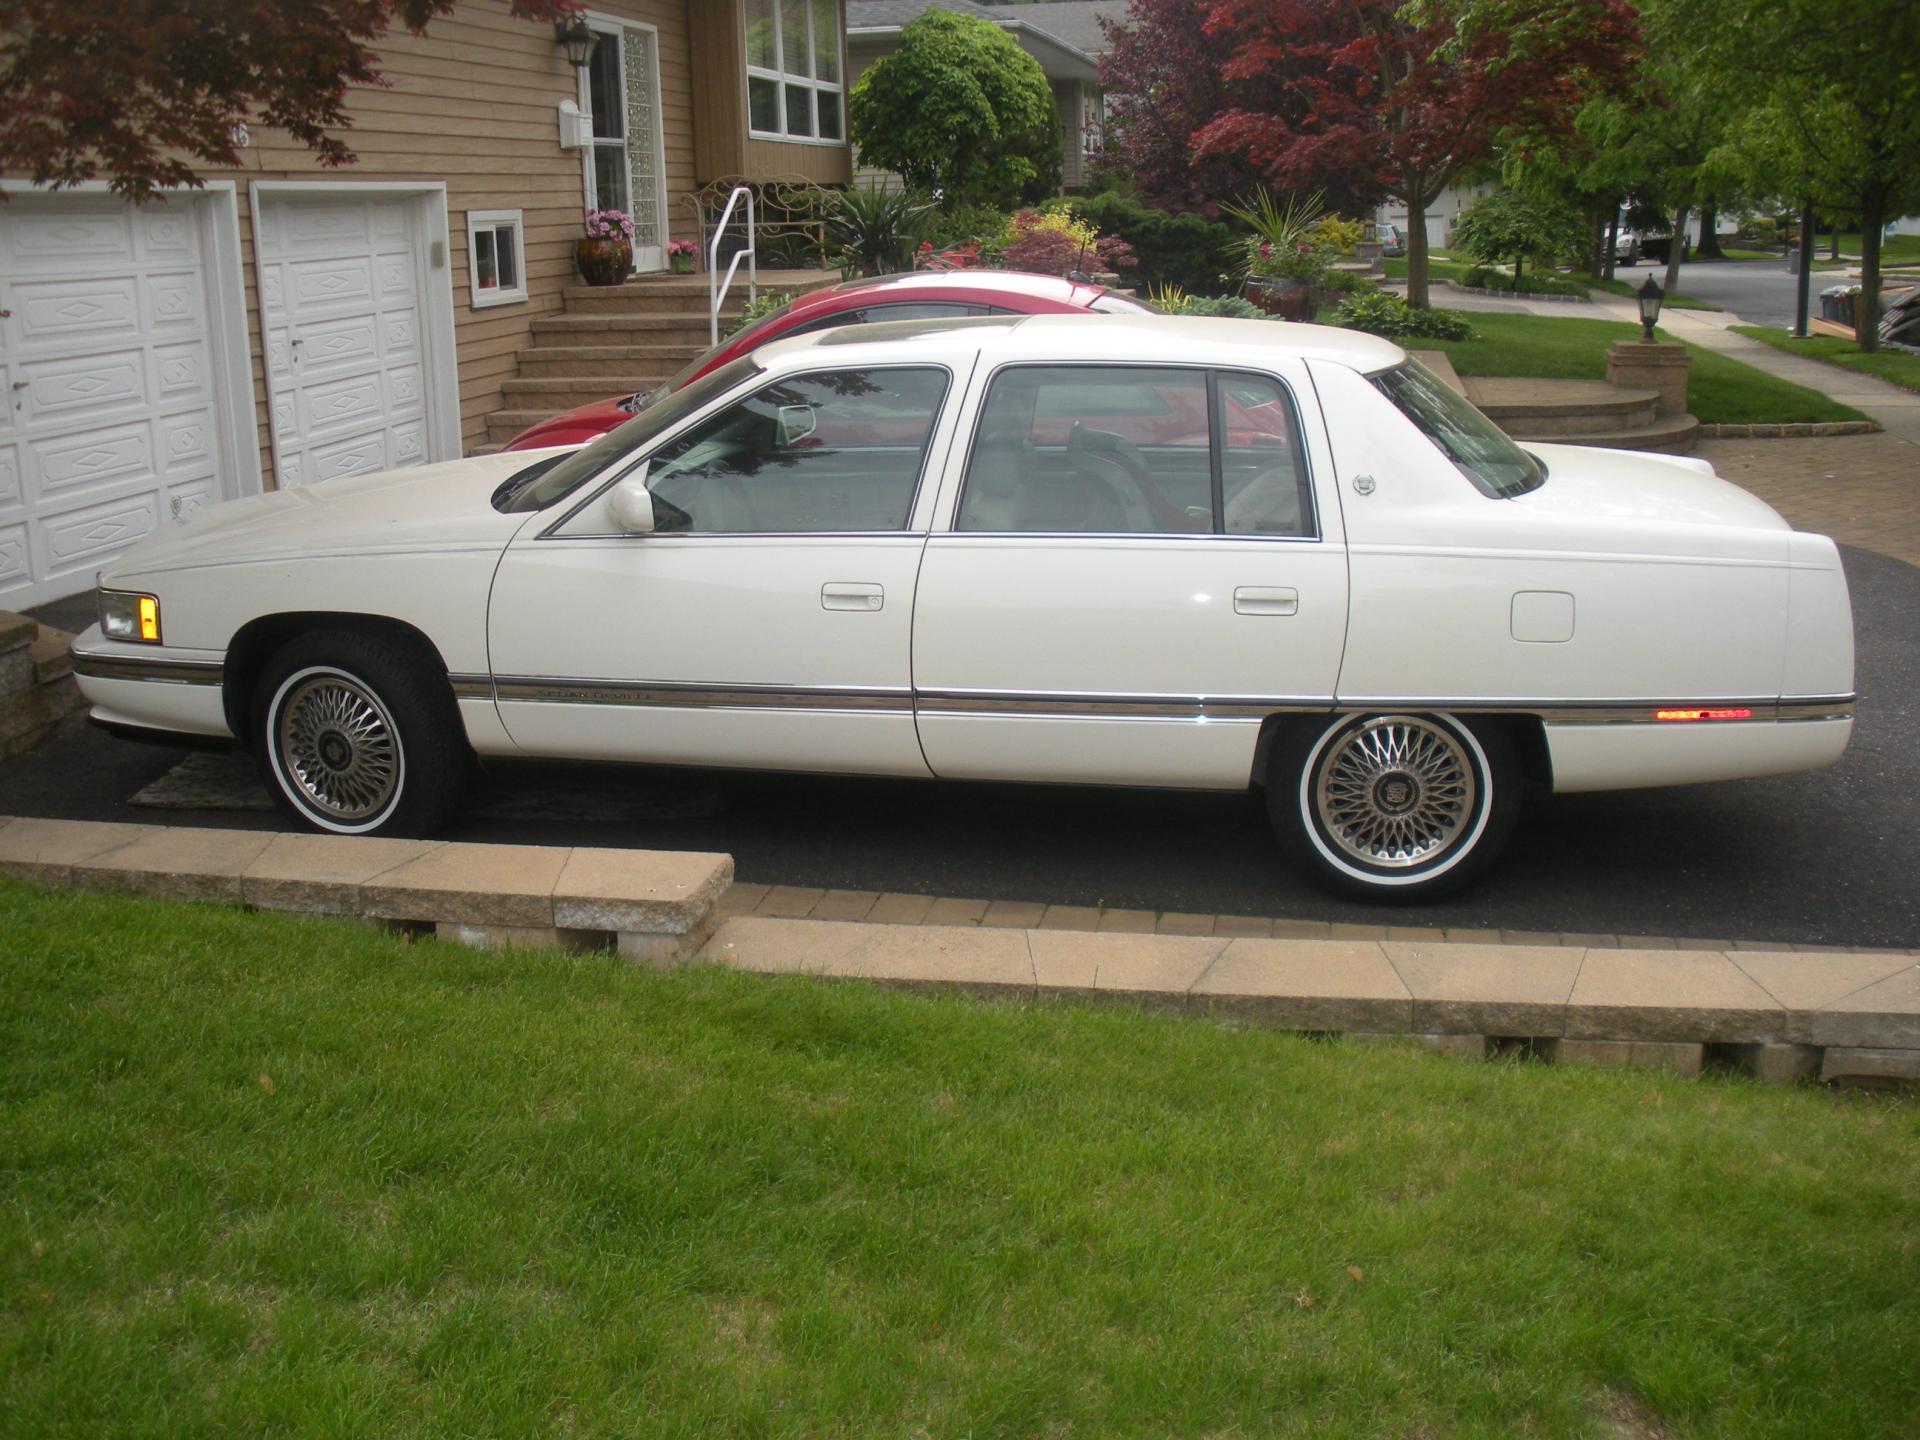 1993 Cadillac DeVille for Sale in Overland, MO - OfferUp